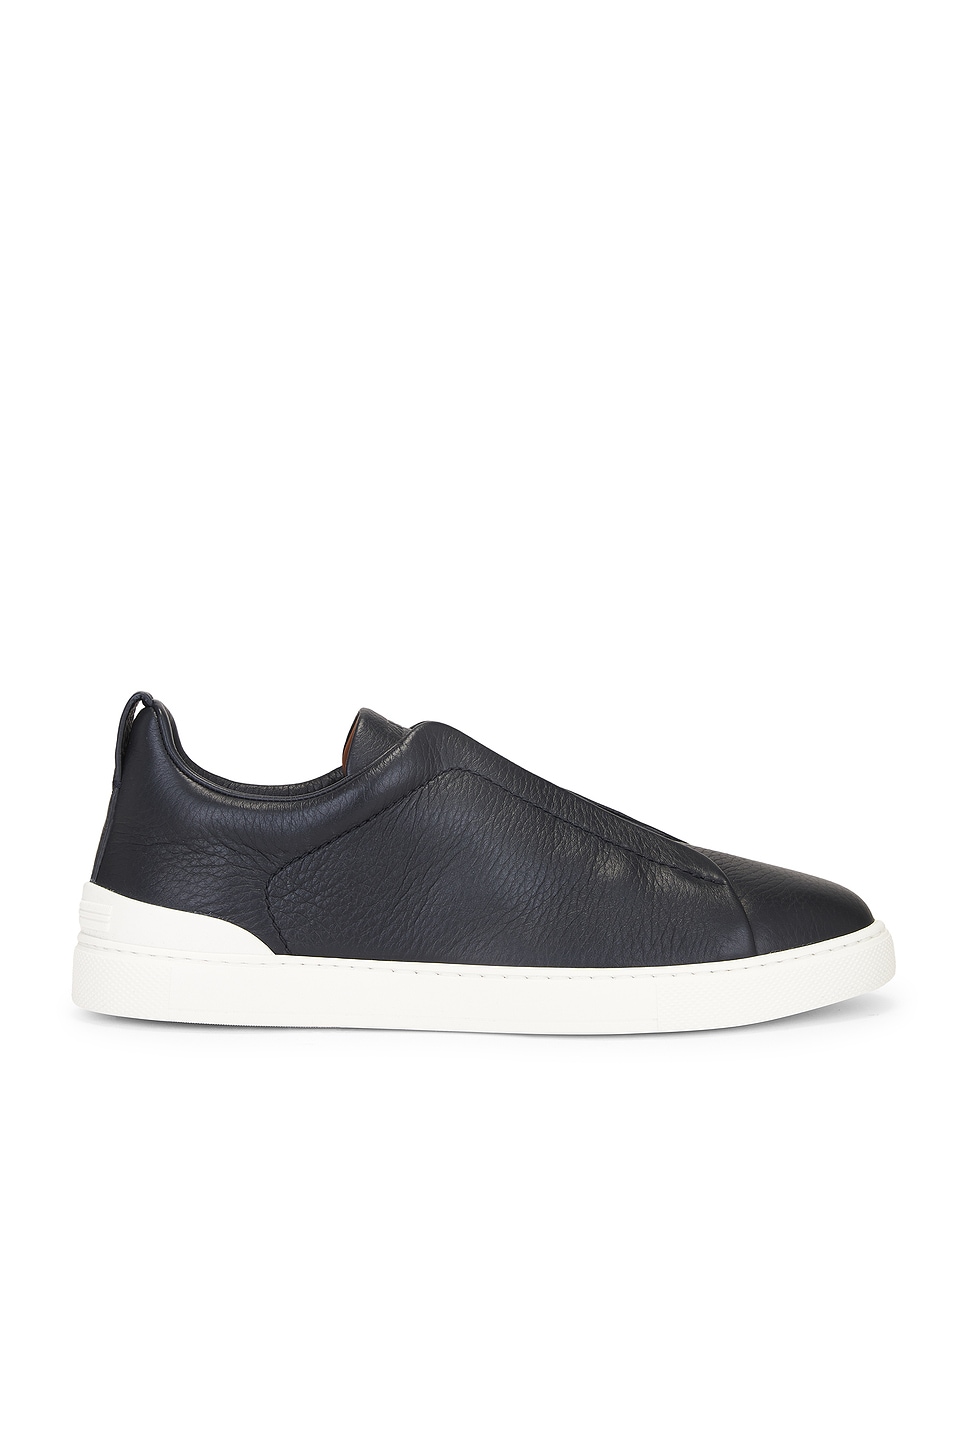 Image 1 of Zegna Triple Stitch Low Top Sneaker in Navy